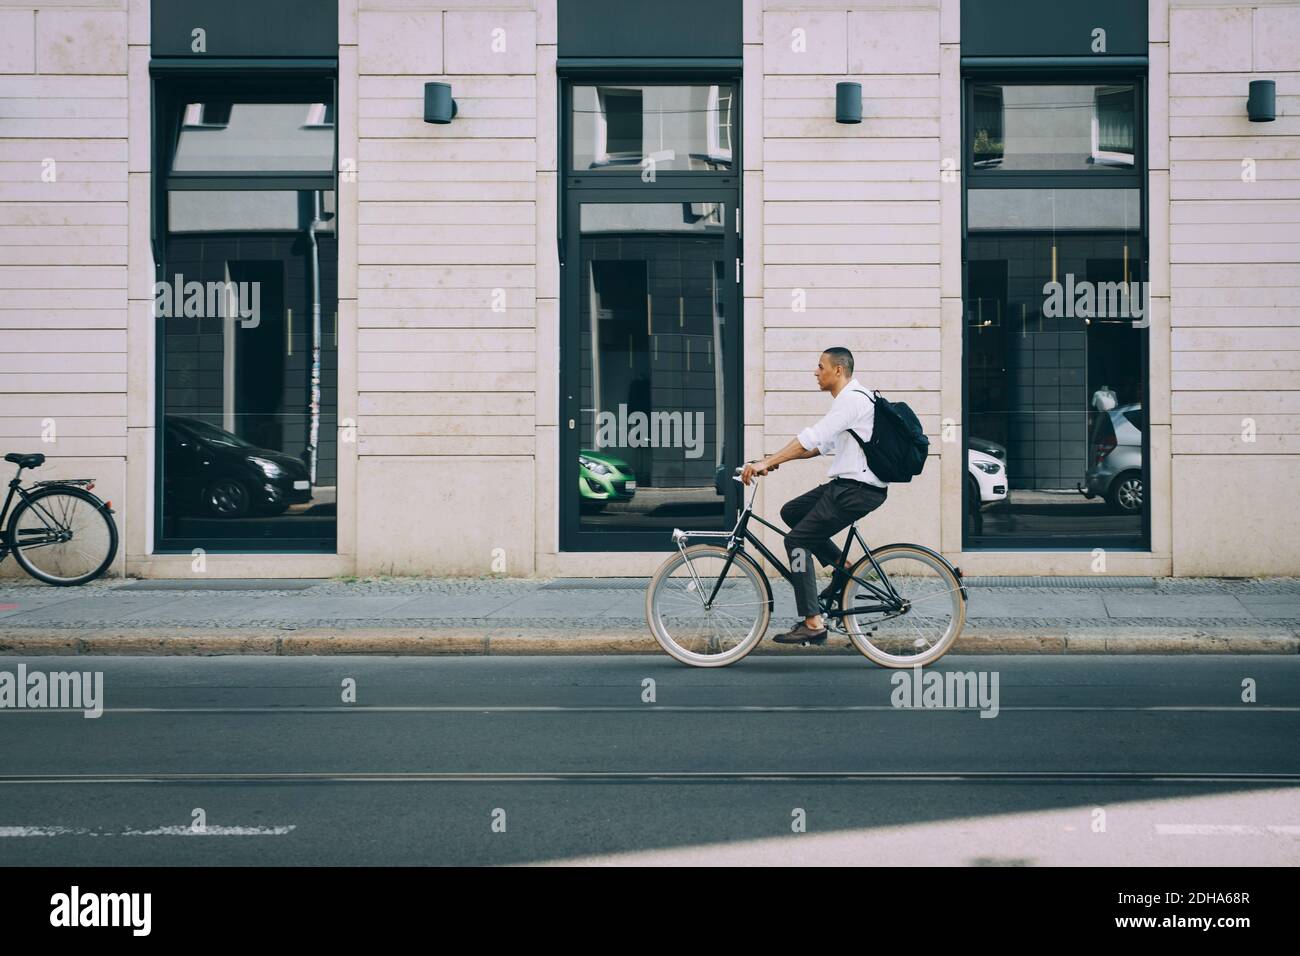 Full length of businessman riding bicycle on street against building in city Stock Photo